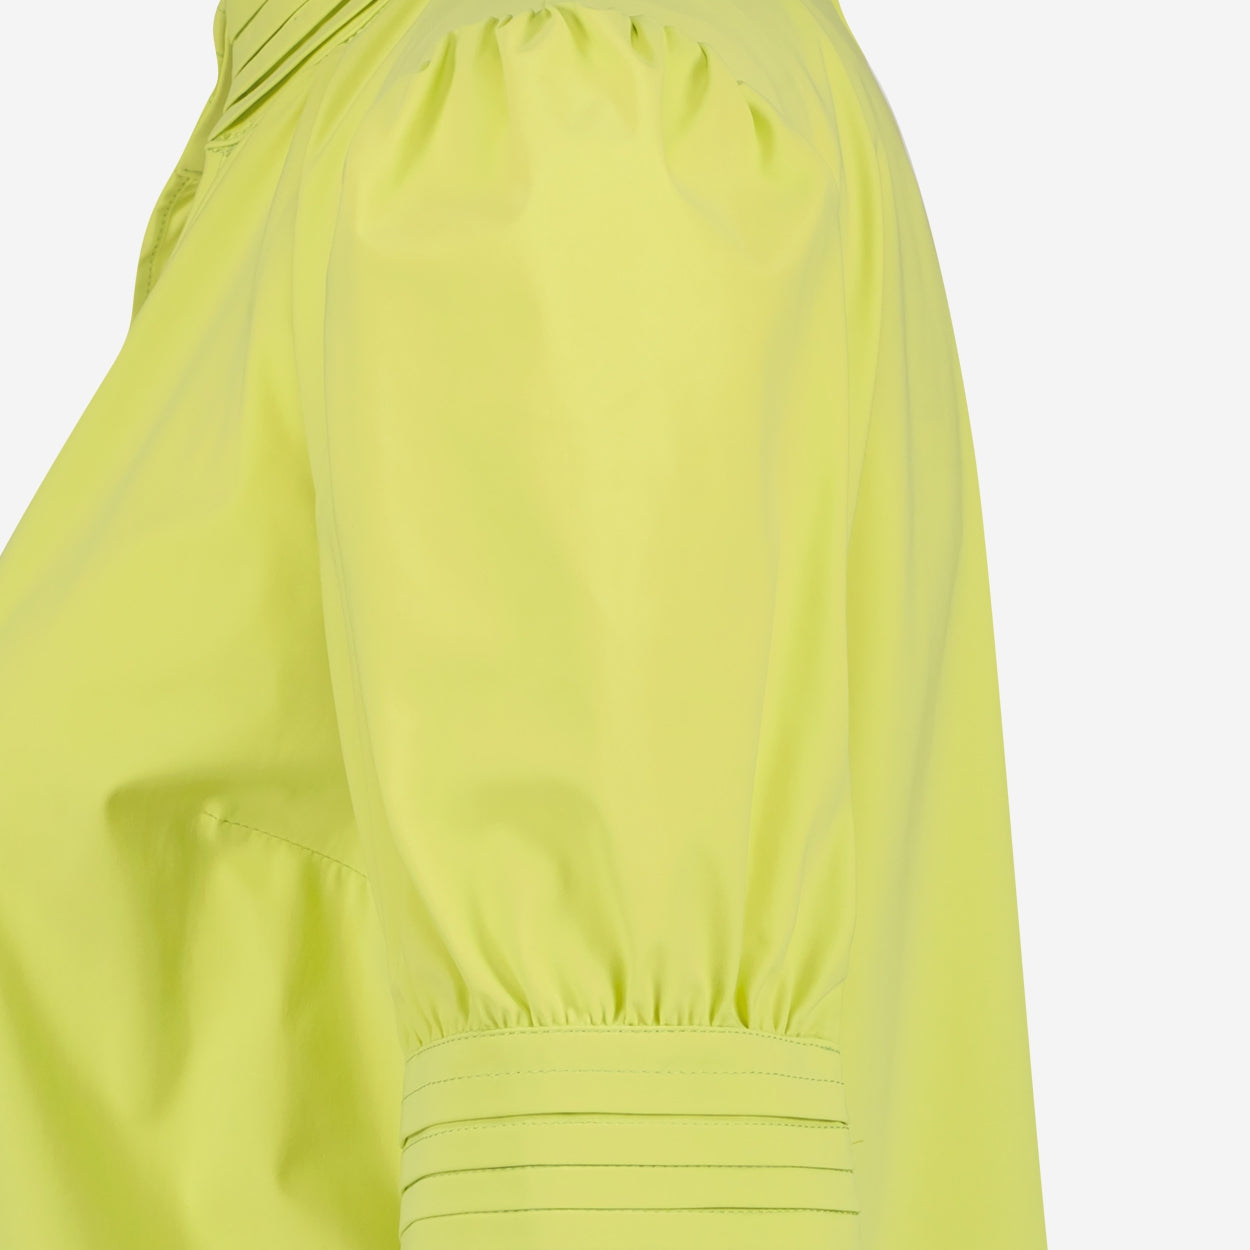 Irma Blouse Technical Jersey | Lime